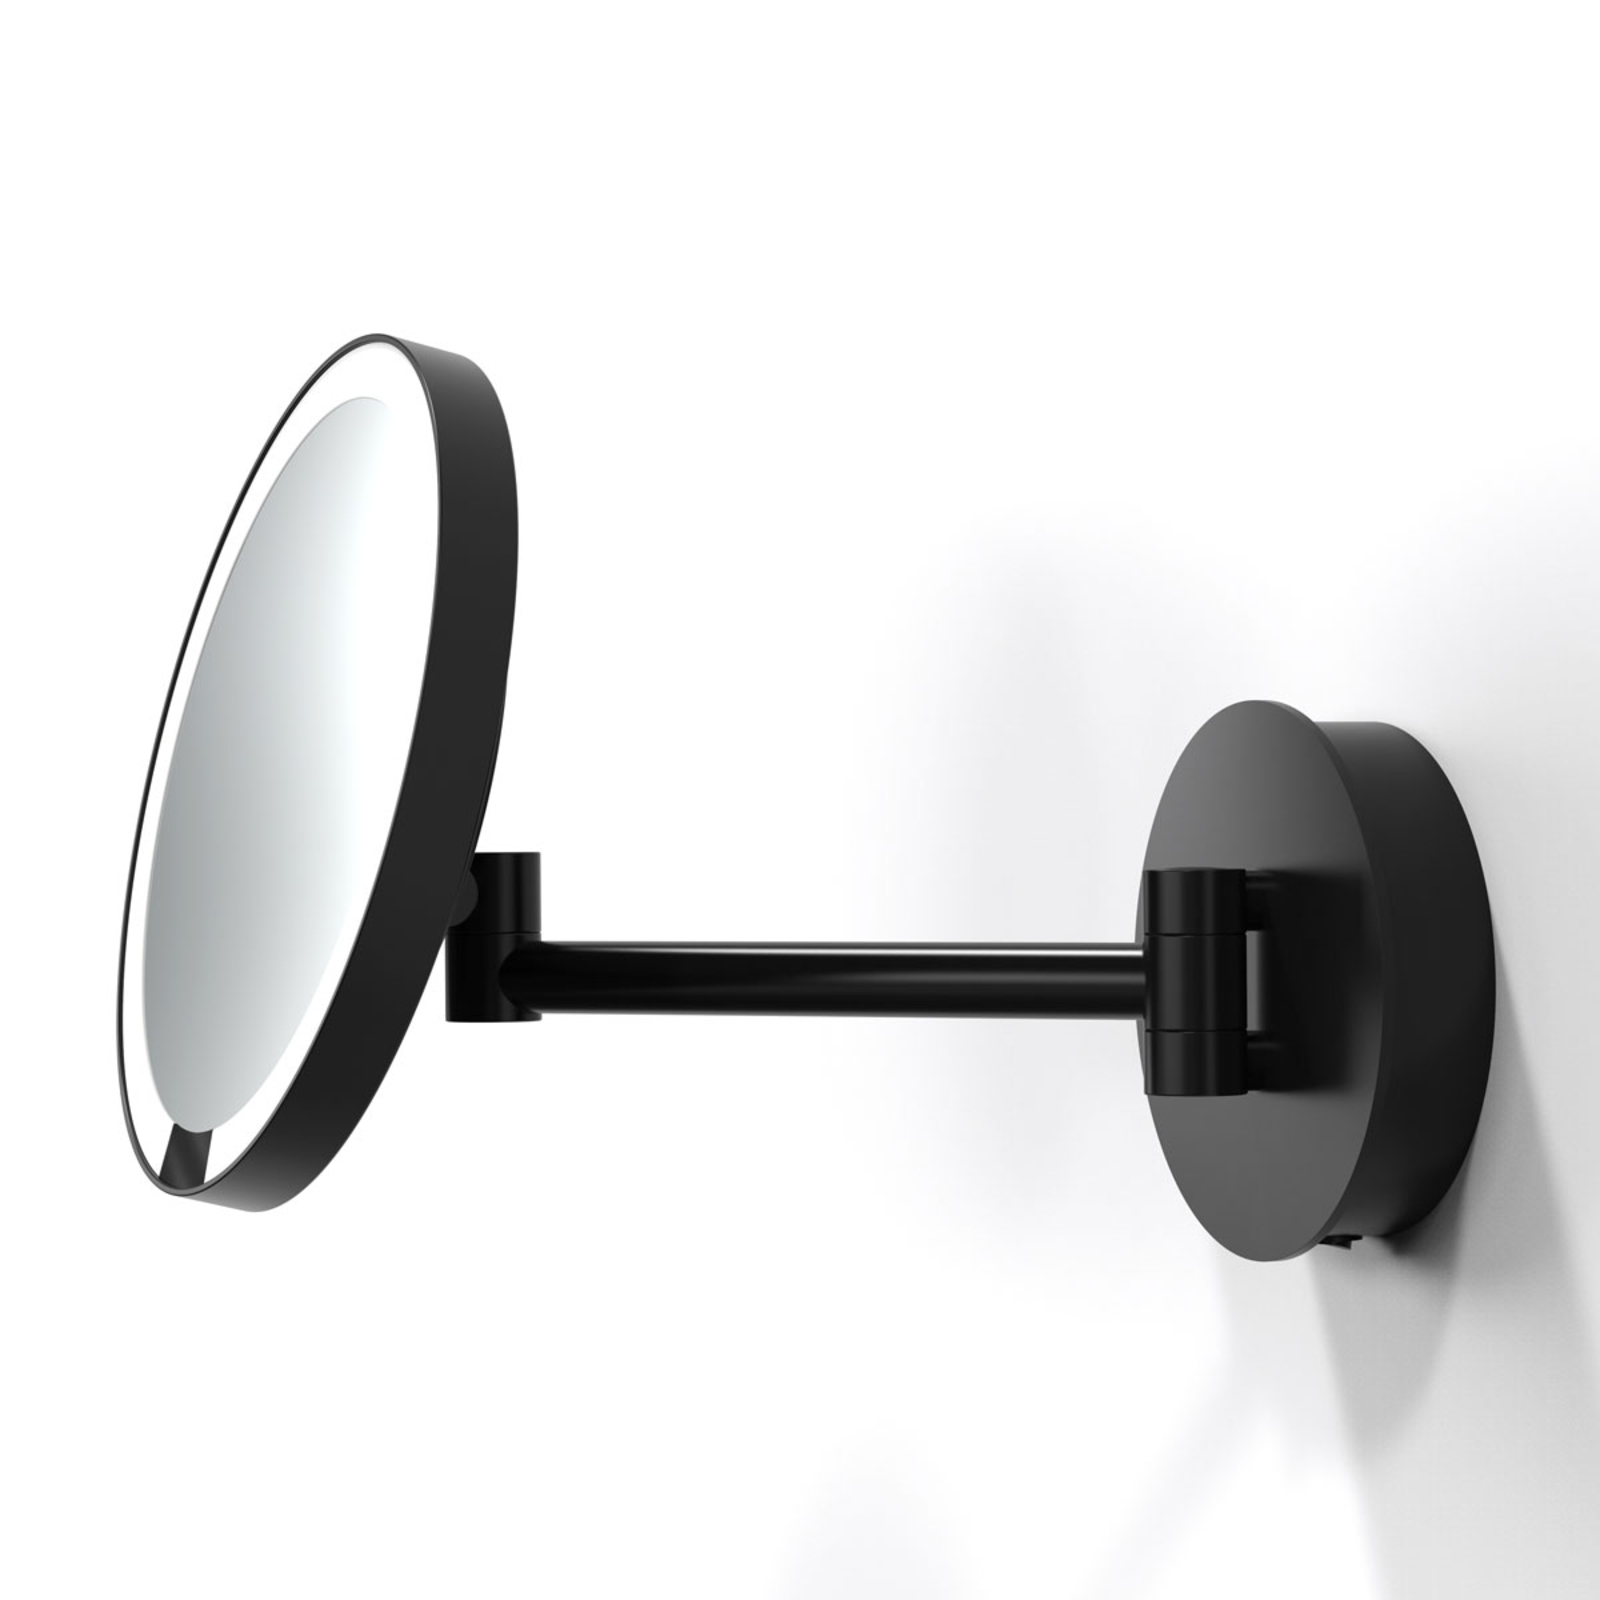 Decor Walther Just Look WR LED wall mirror, black